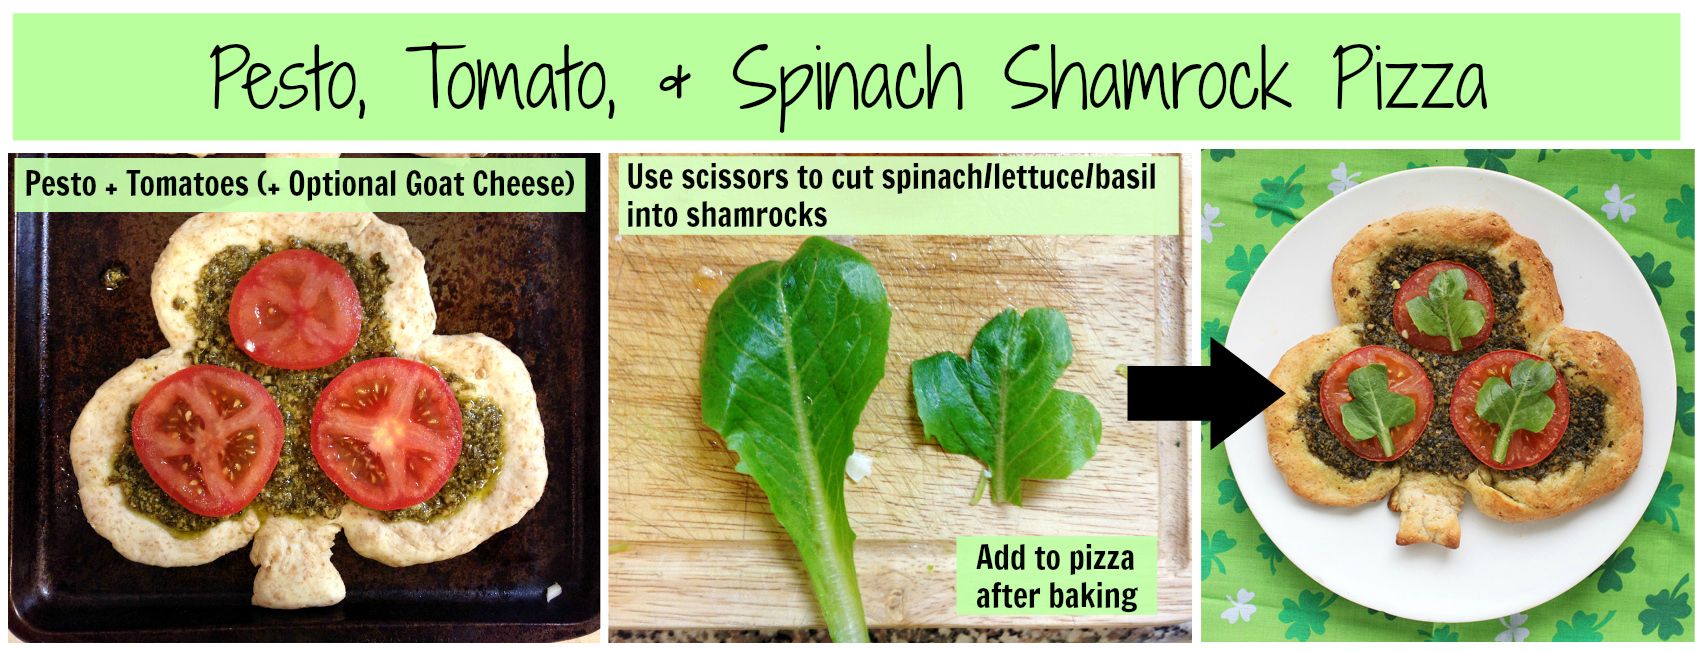  Shamrock Personal Pizzas for St. Patrick's Day